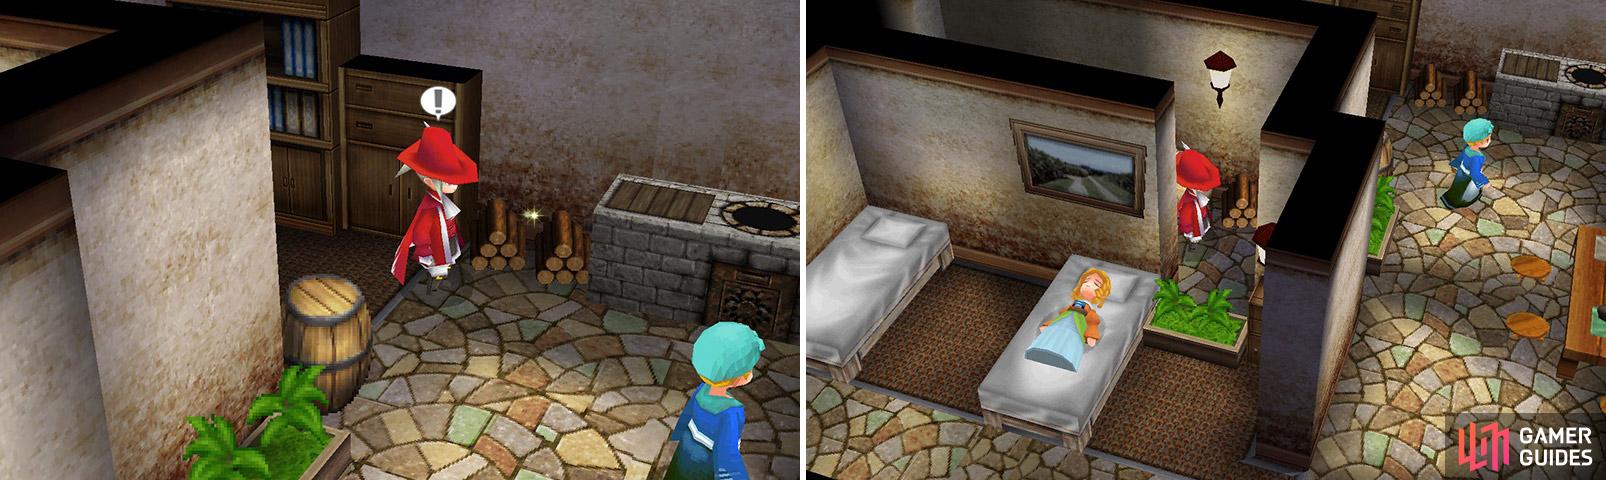 The two items are both hidden, and are connected by a dark passage.